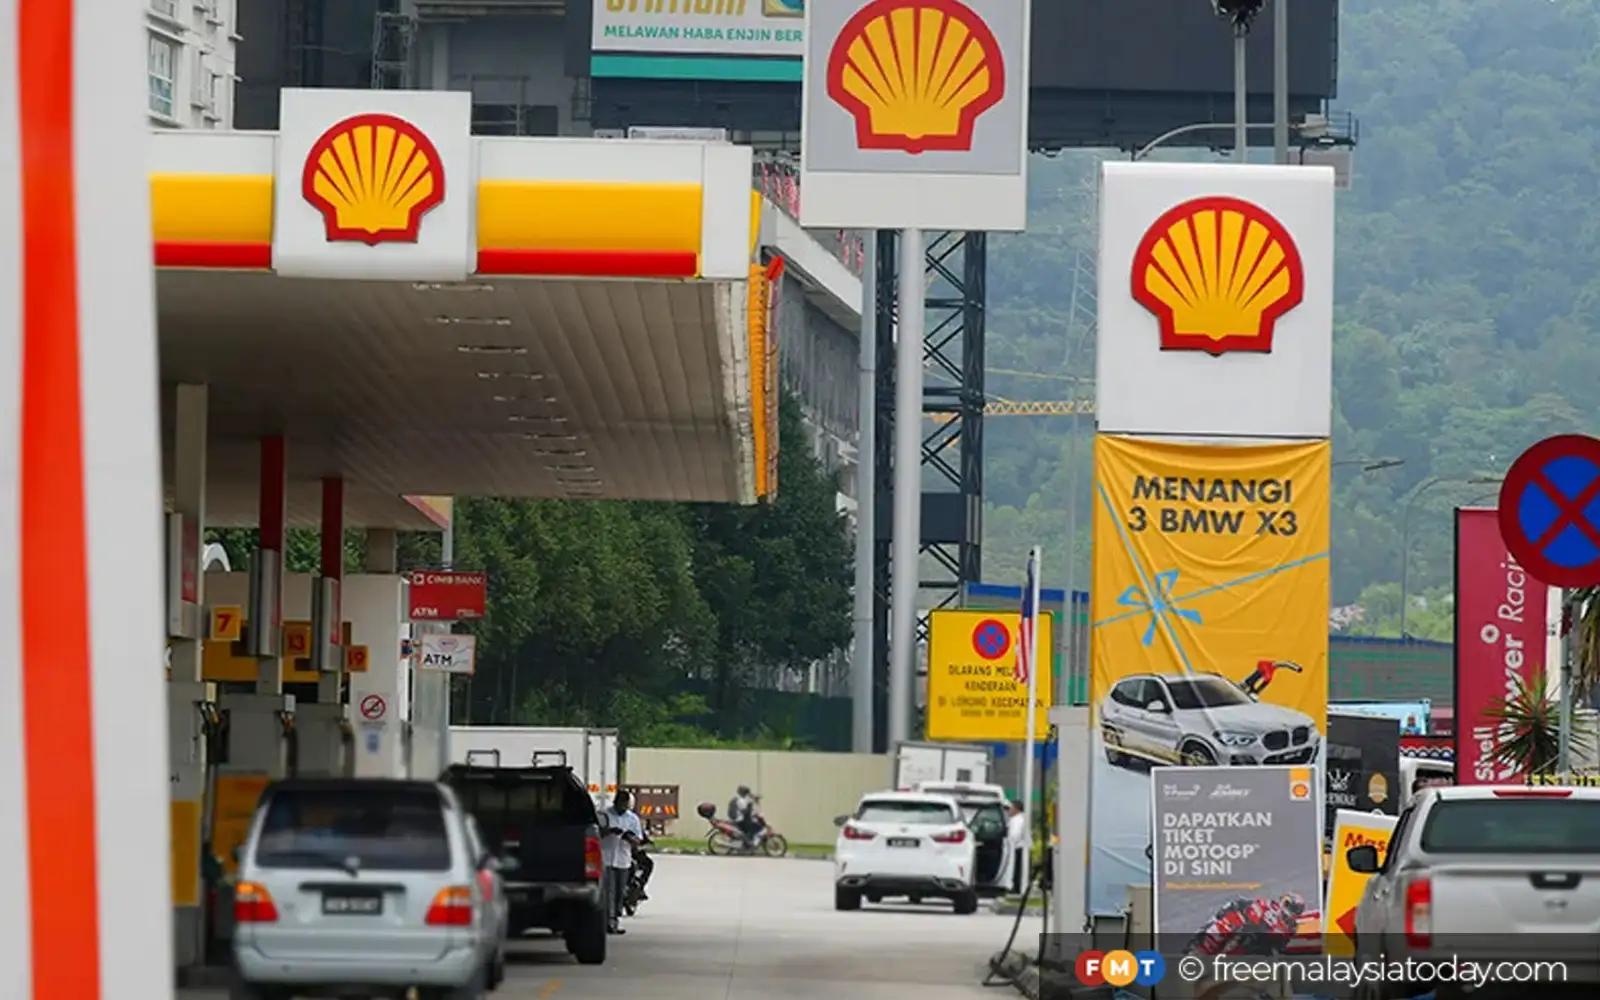 shell in talks with saudi aramco to sell petrol stations in malaysia